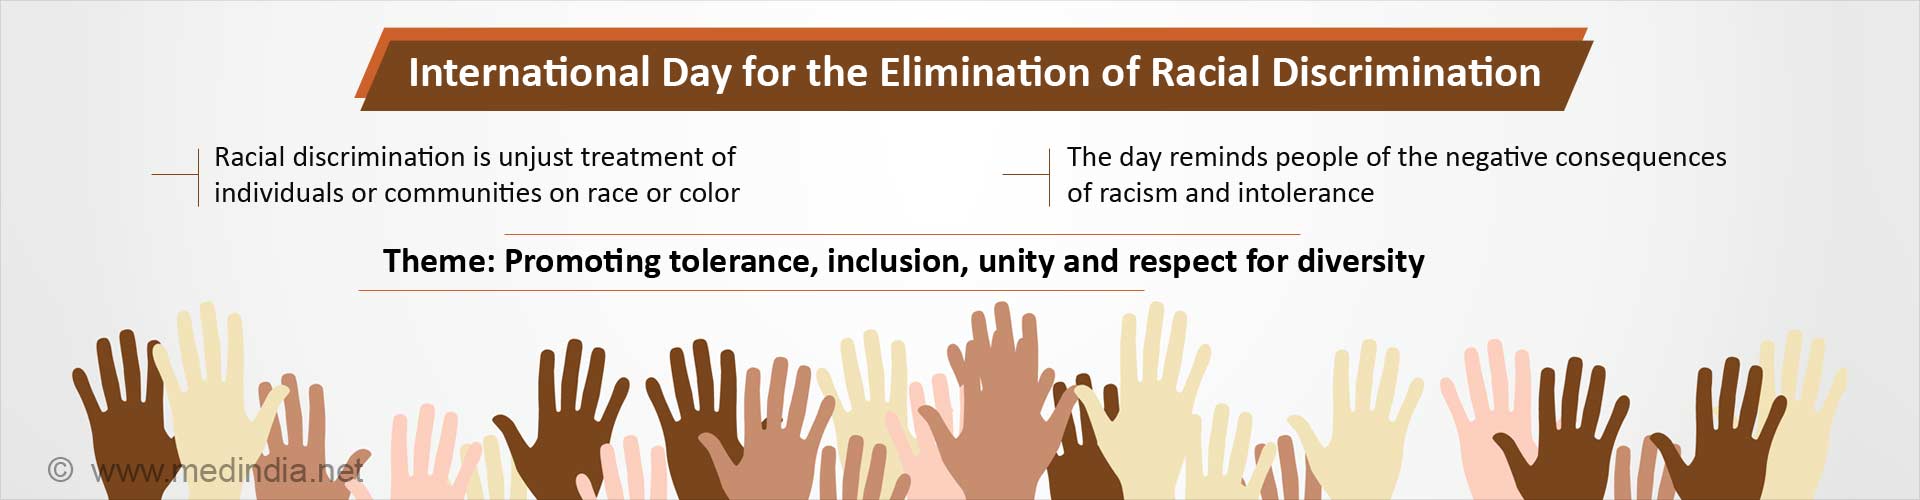 international day for the elimination of racial discrimination
- racial discrimination is unjust treatment of individuals or communities on race or color
- the day reminds people of the negative consequences of racism and intolerance
Theme: Promoting tolerance, inclusion, unity and respect for diversity